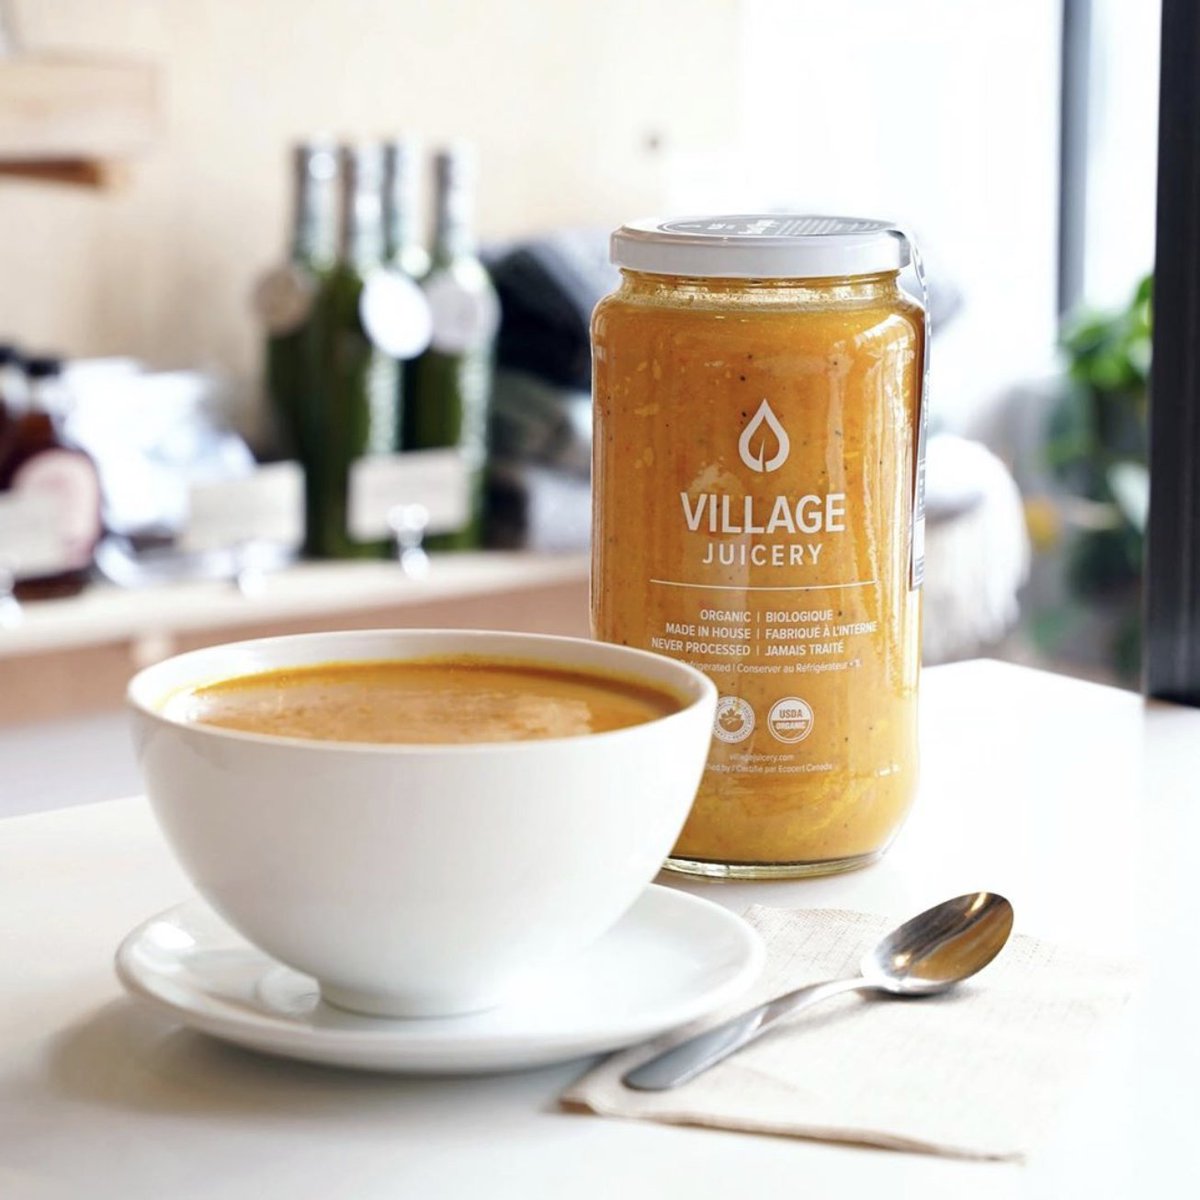 The new Carrot Ginger soup from Village Juicery is now available and so delicious! You will love this flavourful and warm blend of carrot, sweet potato, ginger, turmeric and coconut milk 🧡 #YorkdaleStyle #CentreOfStyle #Vegan #Healthy @villagejuicery